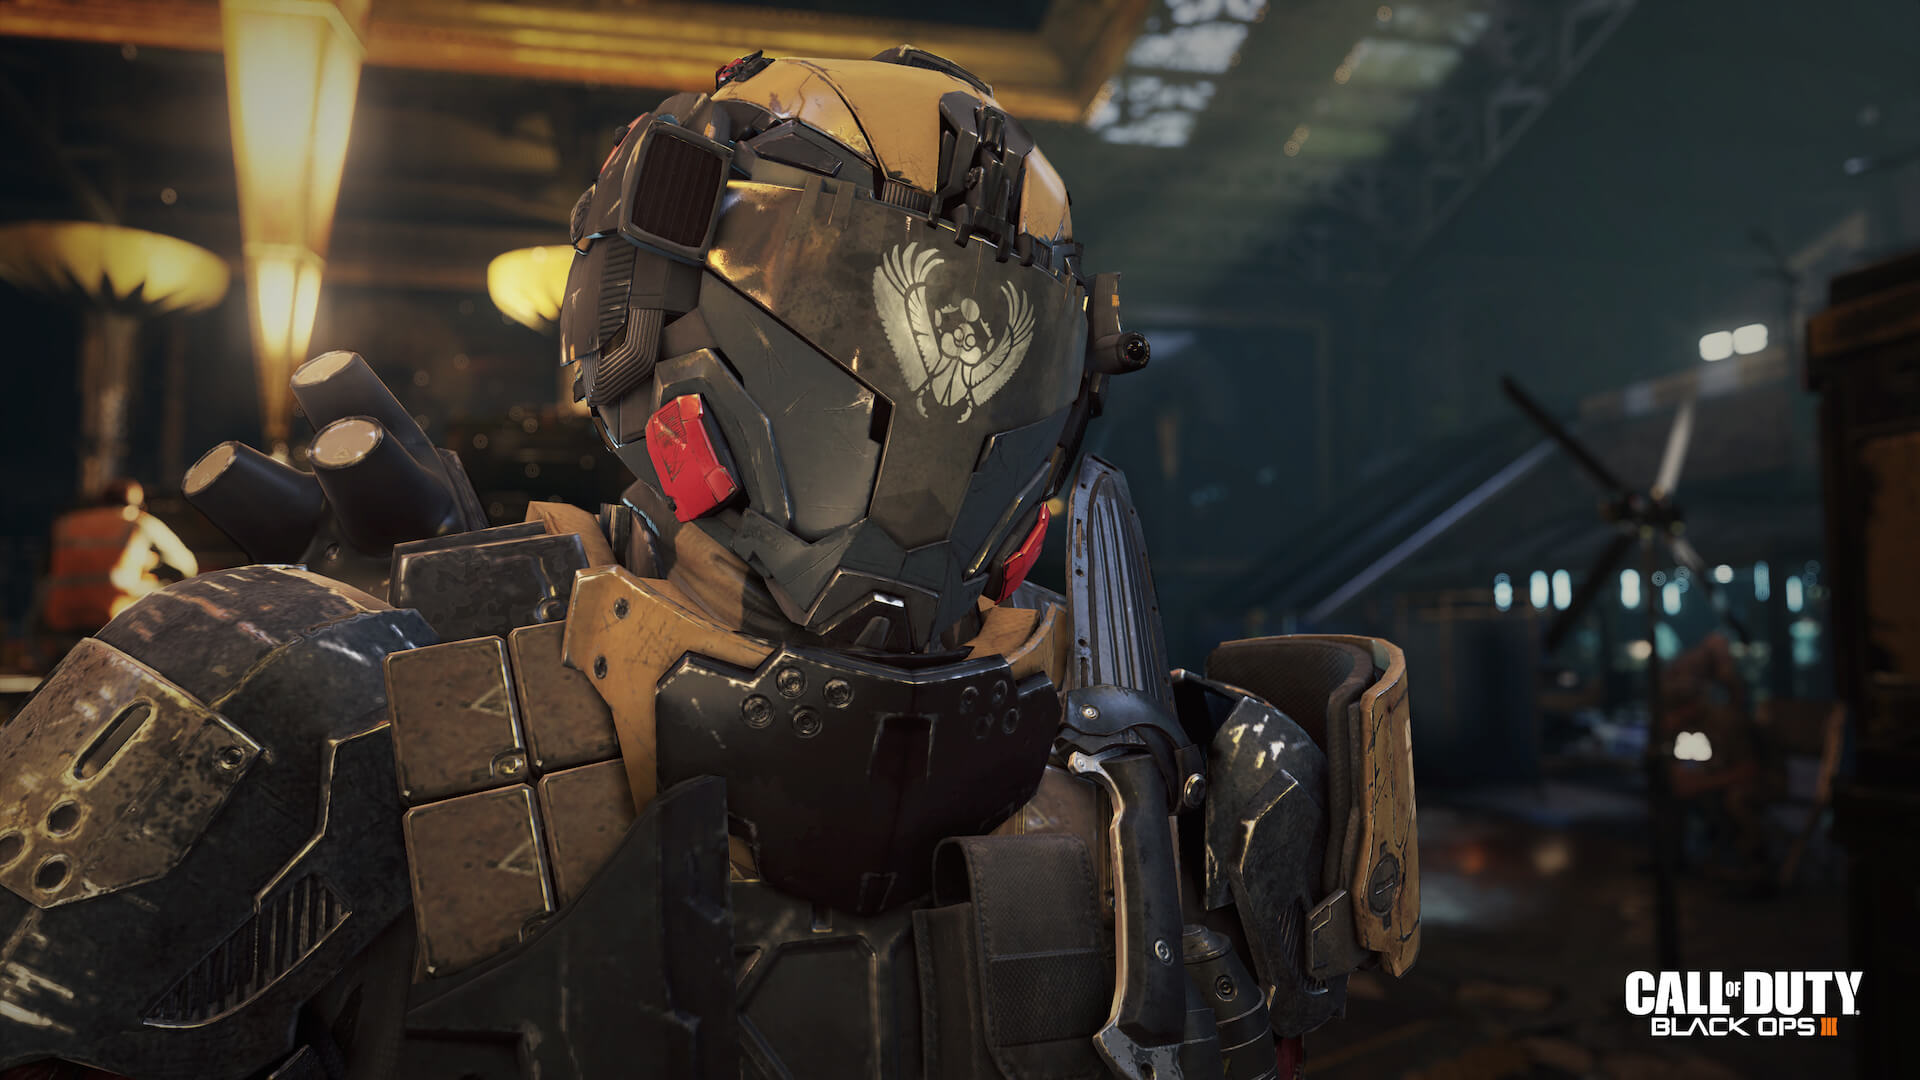 Call of Duty Black Ops 3 Gameplay Details Revealed Beta 1920x1080